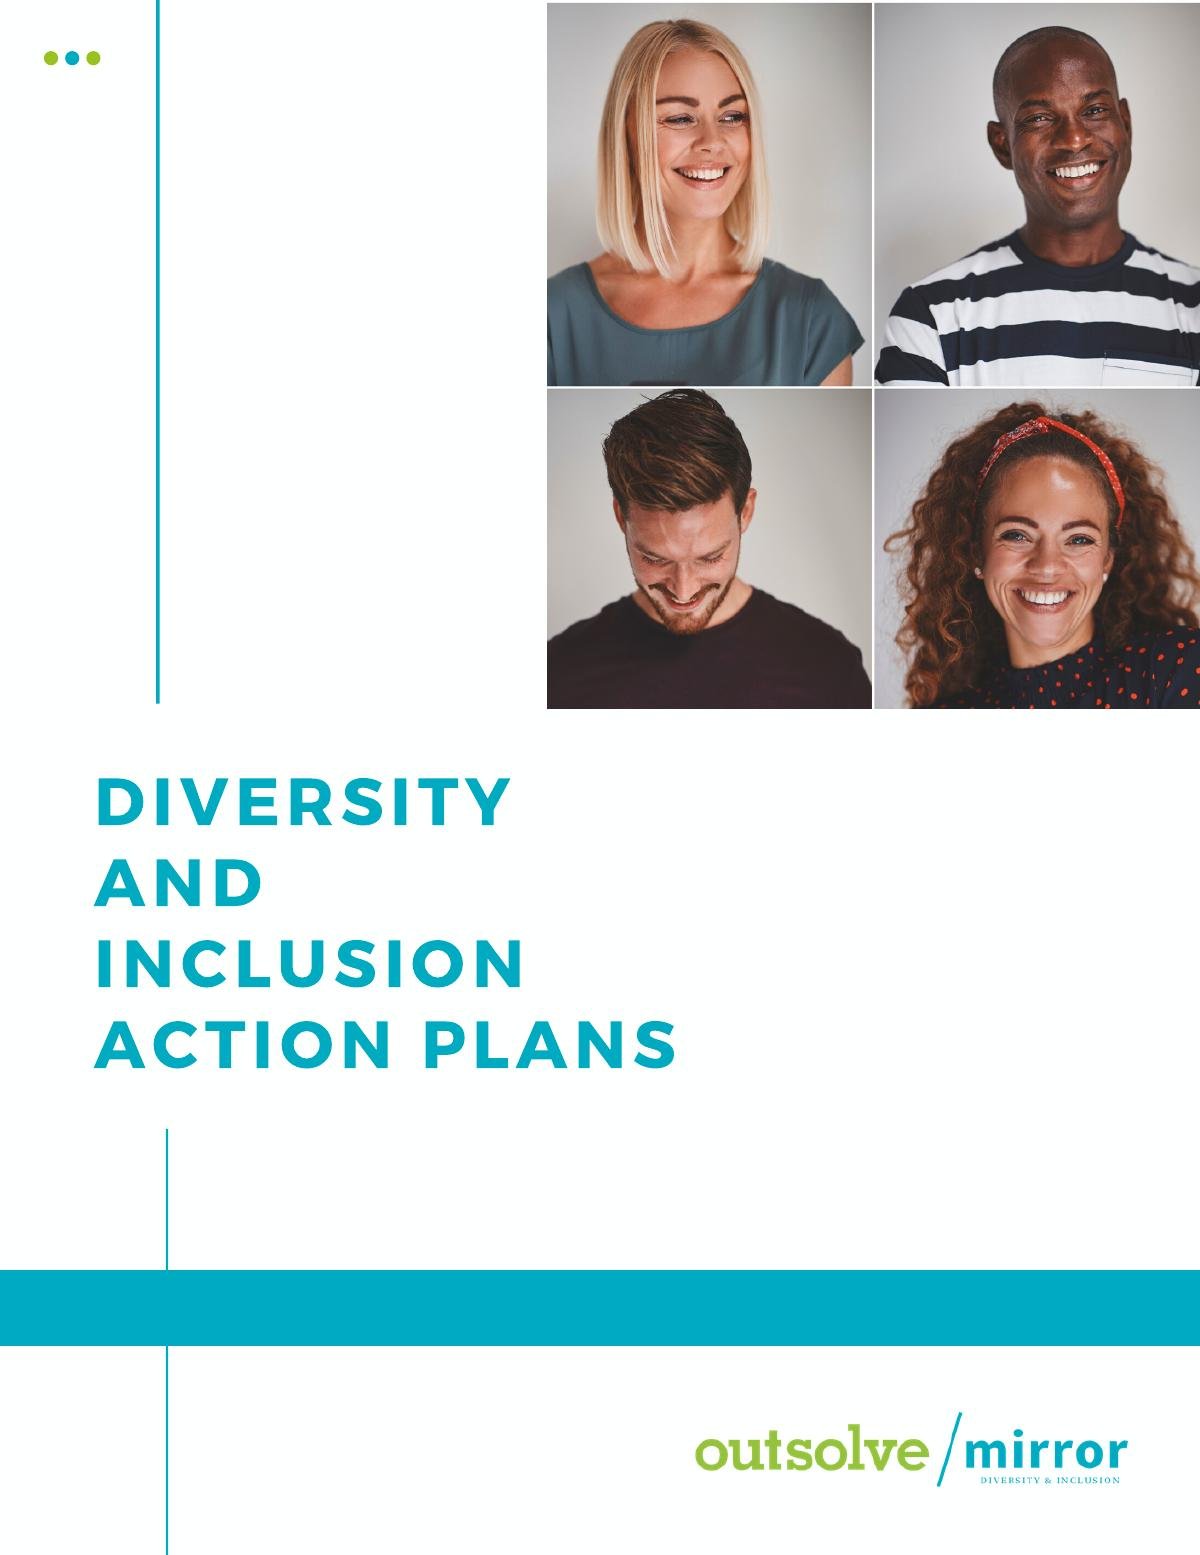 Diversity and Inclusion Action Plans